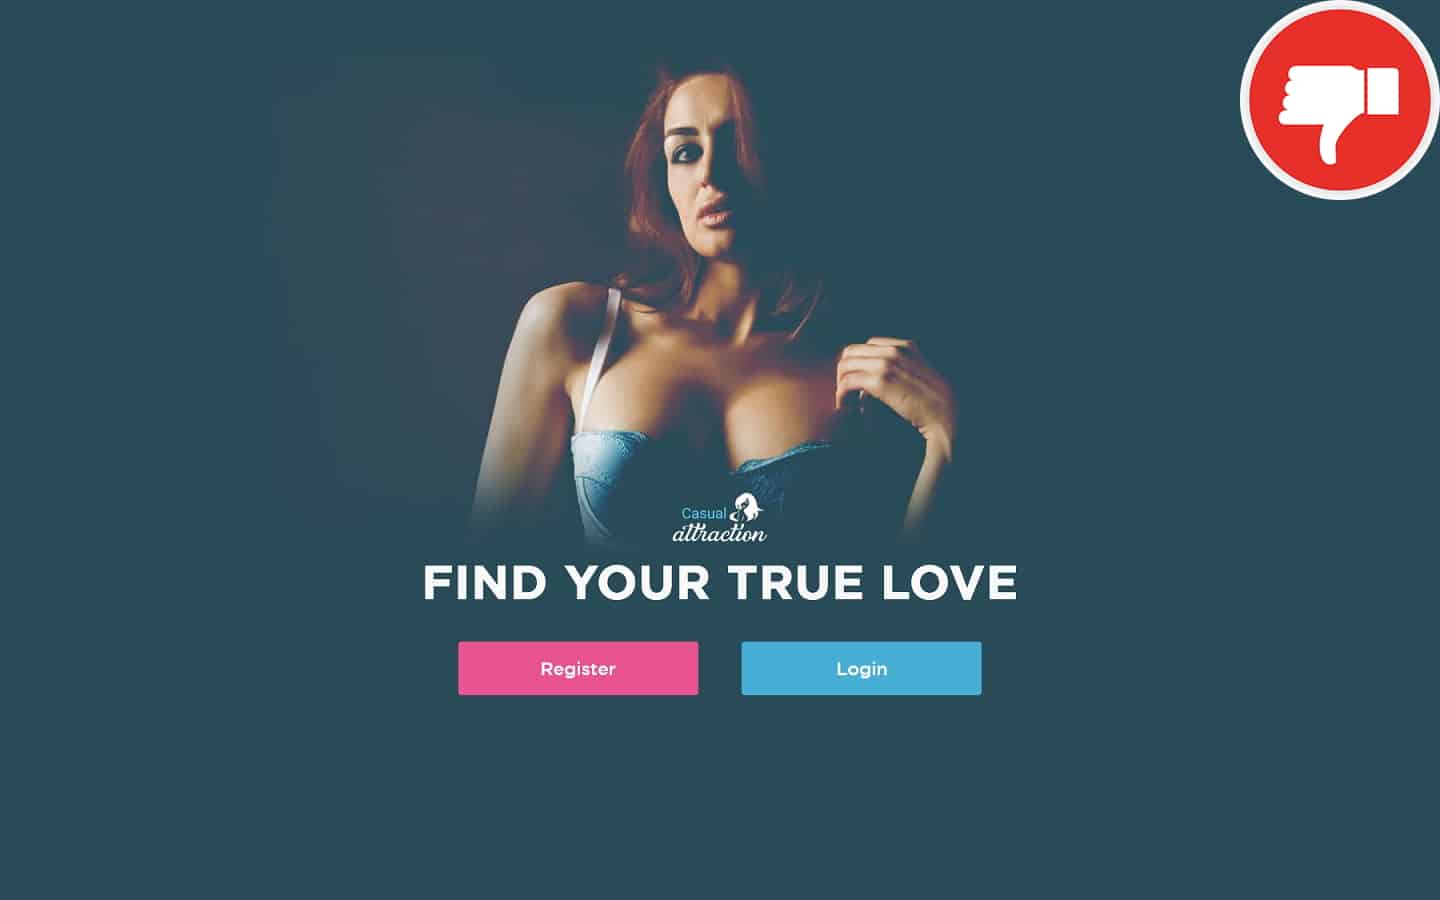 Review CasualAttraction.com scam experience